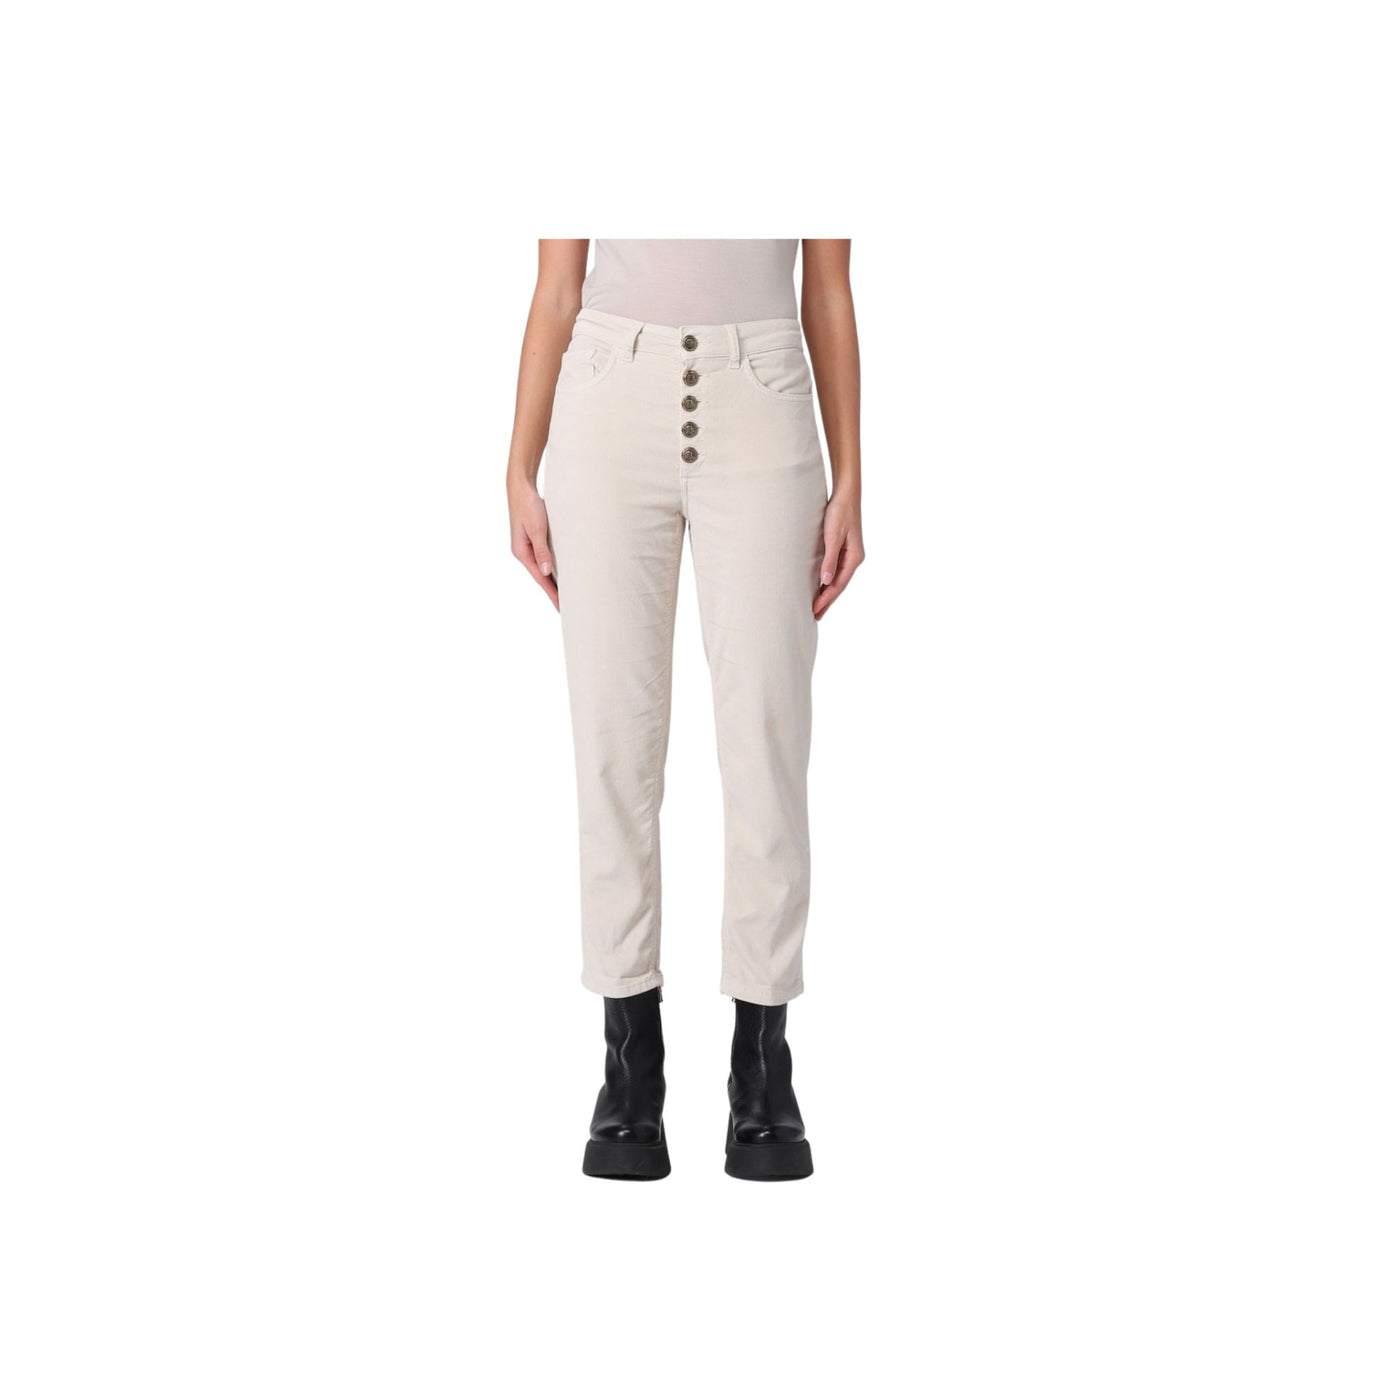 Women's velvety trousers with jewel button